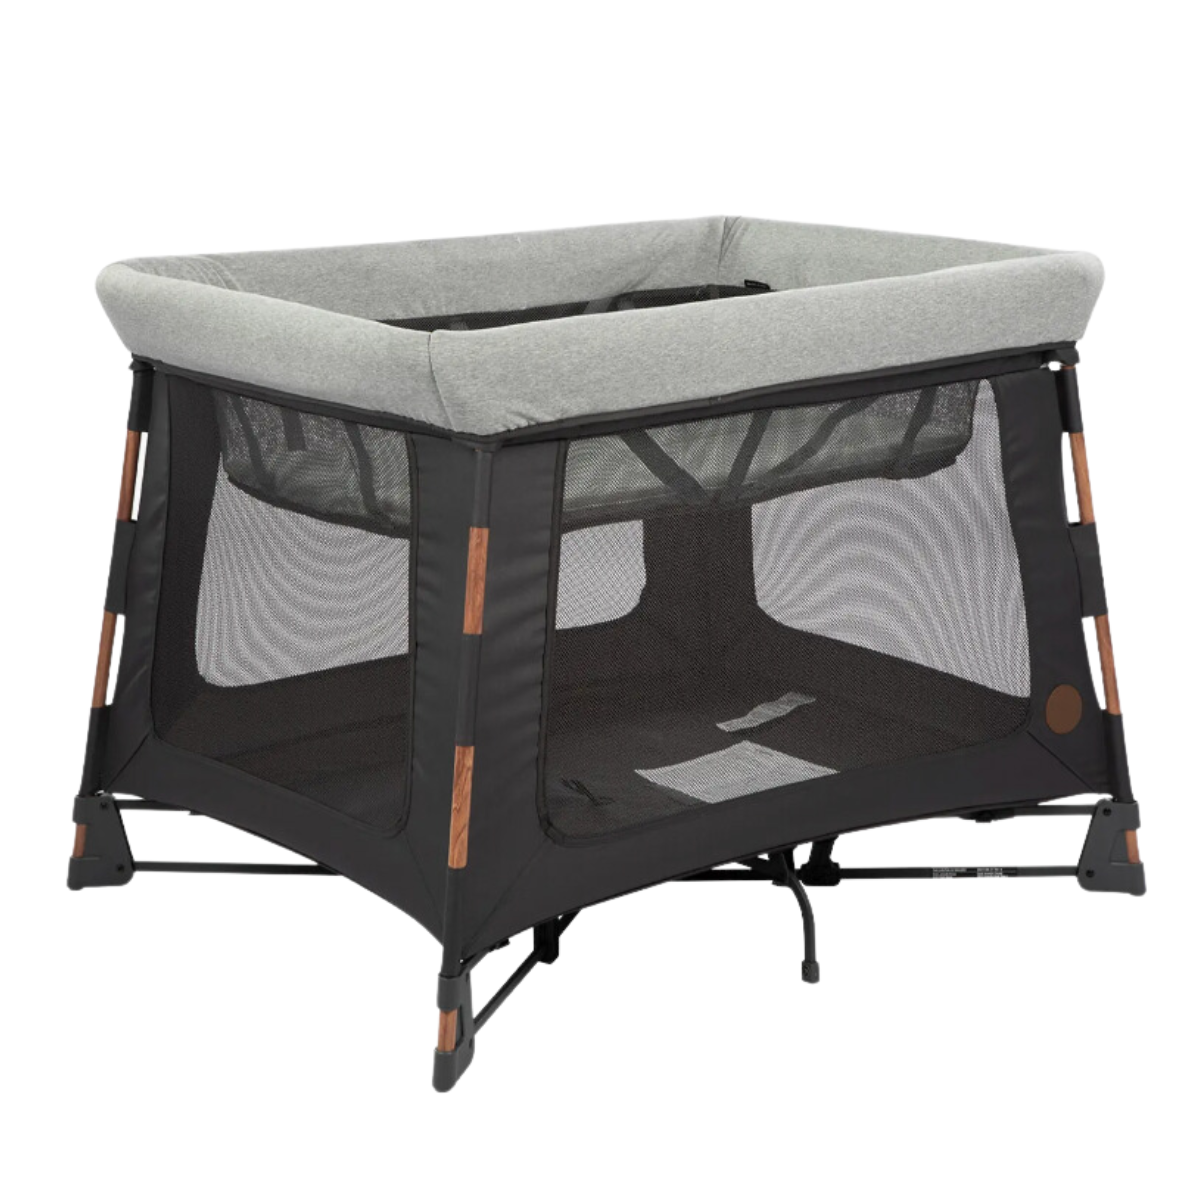 <p>As the name may suggest, you can’t beat the versatility of the Maxi-Cosi 3-in-1 Playard. Use it as a travel crib, a play space for an older baby or toddler, or use it as a full-time bassinet for your newborn. Either way, it’s one of the sturdiest options on the market and it sets up in a flash. (Our tester said you can set it up and take it down with one hand in a single motion.) Unfortunately, it's a bit heavier than some other options and doesn’t fold into the most compact case, but as long as you’re not relying on it for flying, this probably won’t be a deal-breaker—especially given the longevity of this portable crib.</p> <p><strong>What our tester said:</strong> “We used this portable crib in place of a bassinet, and it was so convenient to have it right at our bedside. Plus, it made the transition so much easier when we went on vacations, since our daughter was already familiar with the sleep space. I wish it wasn’t quite so heavy, but honestly, I wouldn’t call any travel crib light per se. And if that’s the sacrifice for a super comfy spot that ensures my daughter gets a good night’s sleep wherever we are? Fine by me.”</p> <ul> <li><strong>Pros:</strong> Super easy setup, very versatile, highly durable, great for playtime</li> <li><strong>Cons:</strong> On the heavier side, expensive, not great for air travel</li> <li><strong>Our tester’s grade:</strong> A</li> <li><strong>Setup:</strong> A <strong>|</strong> <strong>Durability:</strong> A- <strong>| Portability:</strong> A- <strong>|</strong> <strong>Overall Value:</strong> A</li> <li><strong>Weight:</strong> 18.5 pounds</li> <li><strong>Dimensions:</strong> 33.86 x 30.71 x 41.73 inches</li> <li><strong>Age Range:</strong> Birth to 35 inches tall</li> </ul> <p><em>Save when you shop the best travel cribs with these <a href="https://www.glamour.com/coupons/nordstrom?mbid=synd_msn_rss&utm_source=msn&utm_medium=syndication">Nordstrom promo codes</a>.</em></p> $275, Nordstrom. <a href="https://www.nordstrom.com/s/maxi-cosi-maxi-cosi-swift-3-in-1-playard/7084017">Get it now!</a><p>Sign up for today’s biggest stories, from pop culture to politics.</p><a href="https://www.glamour.com/newsletter/news?sourceCode=msnsend">Sign Up</a>